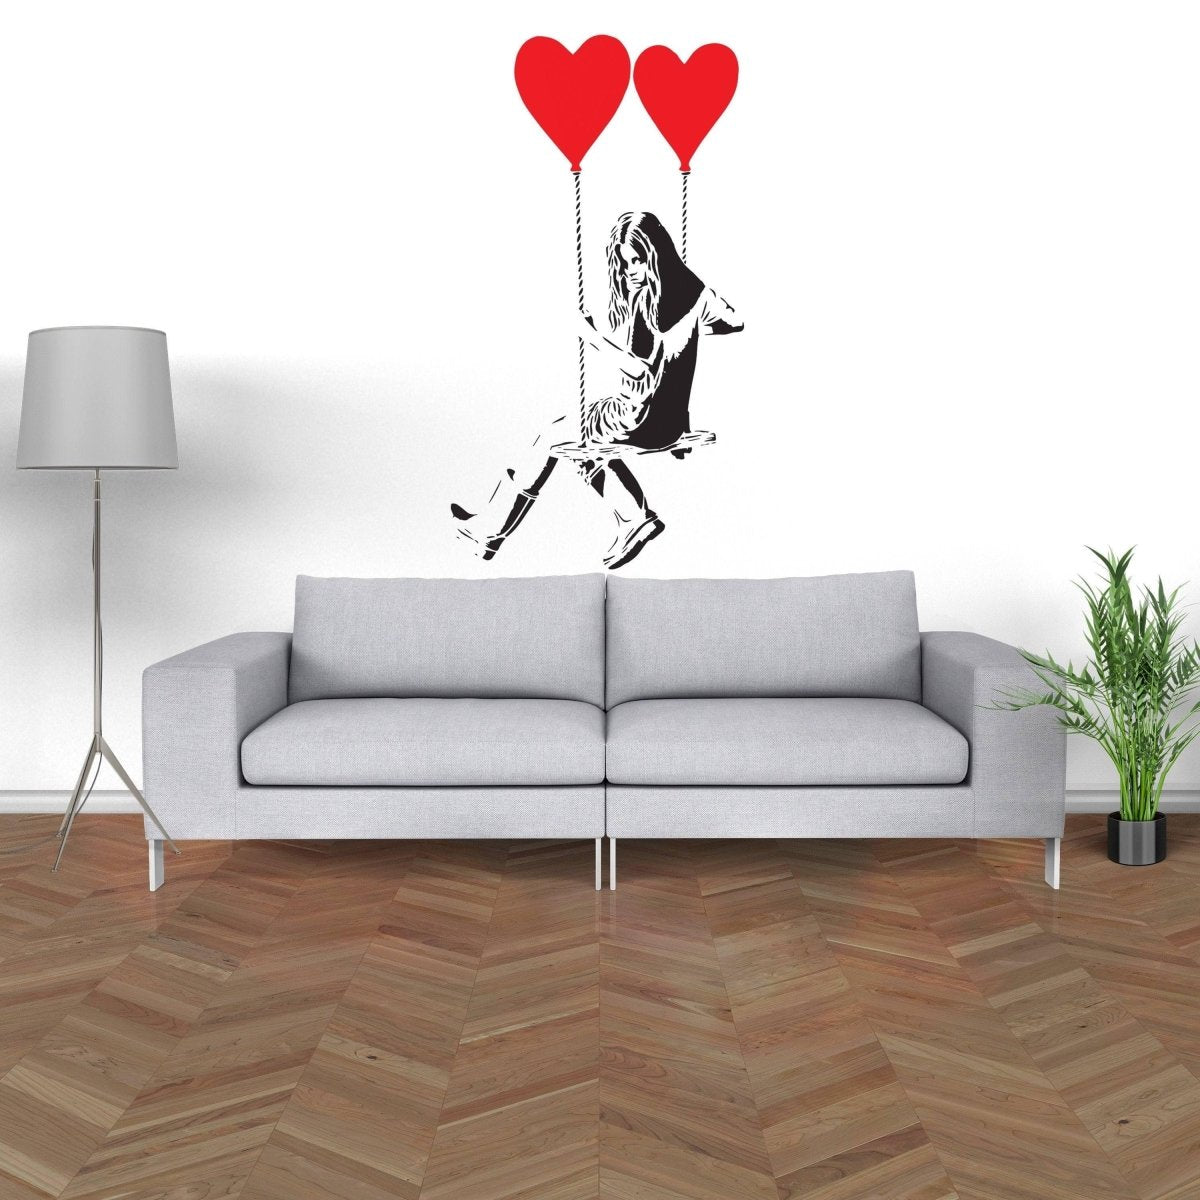 Banksy Girl With Heart Balloon Wall Sticker – Decords